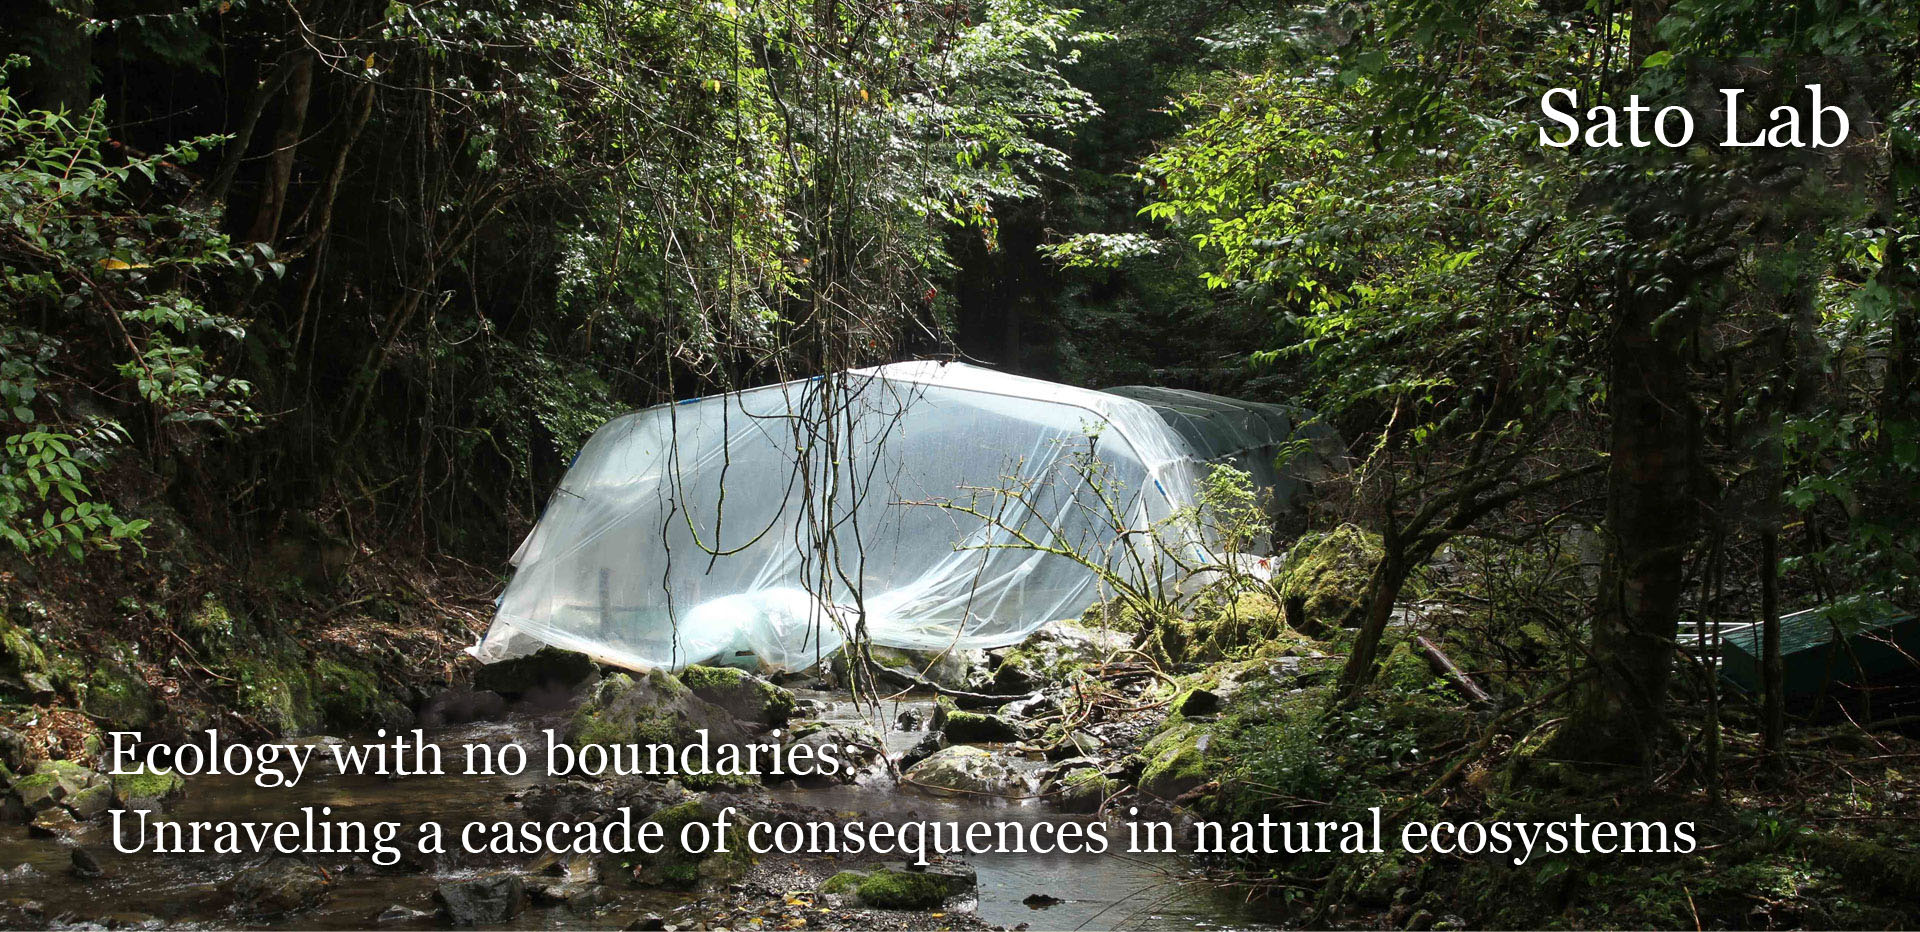 Sato Laboratory, Kobe University, Ecology with no boundaries: Unraveling a cascade of consequences in natural ecosystems